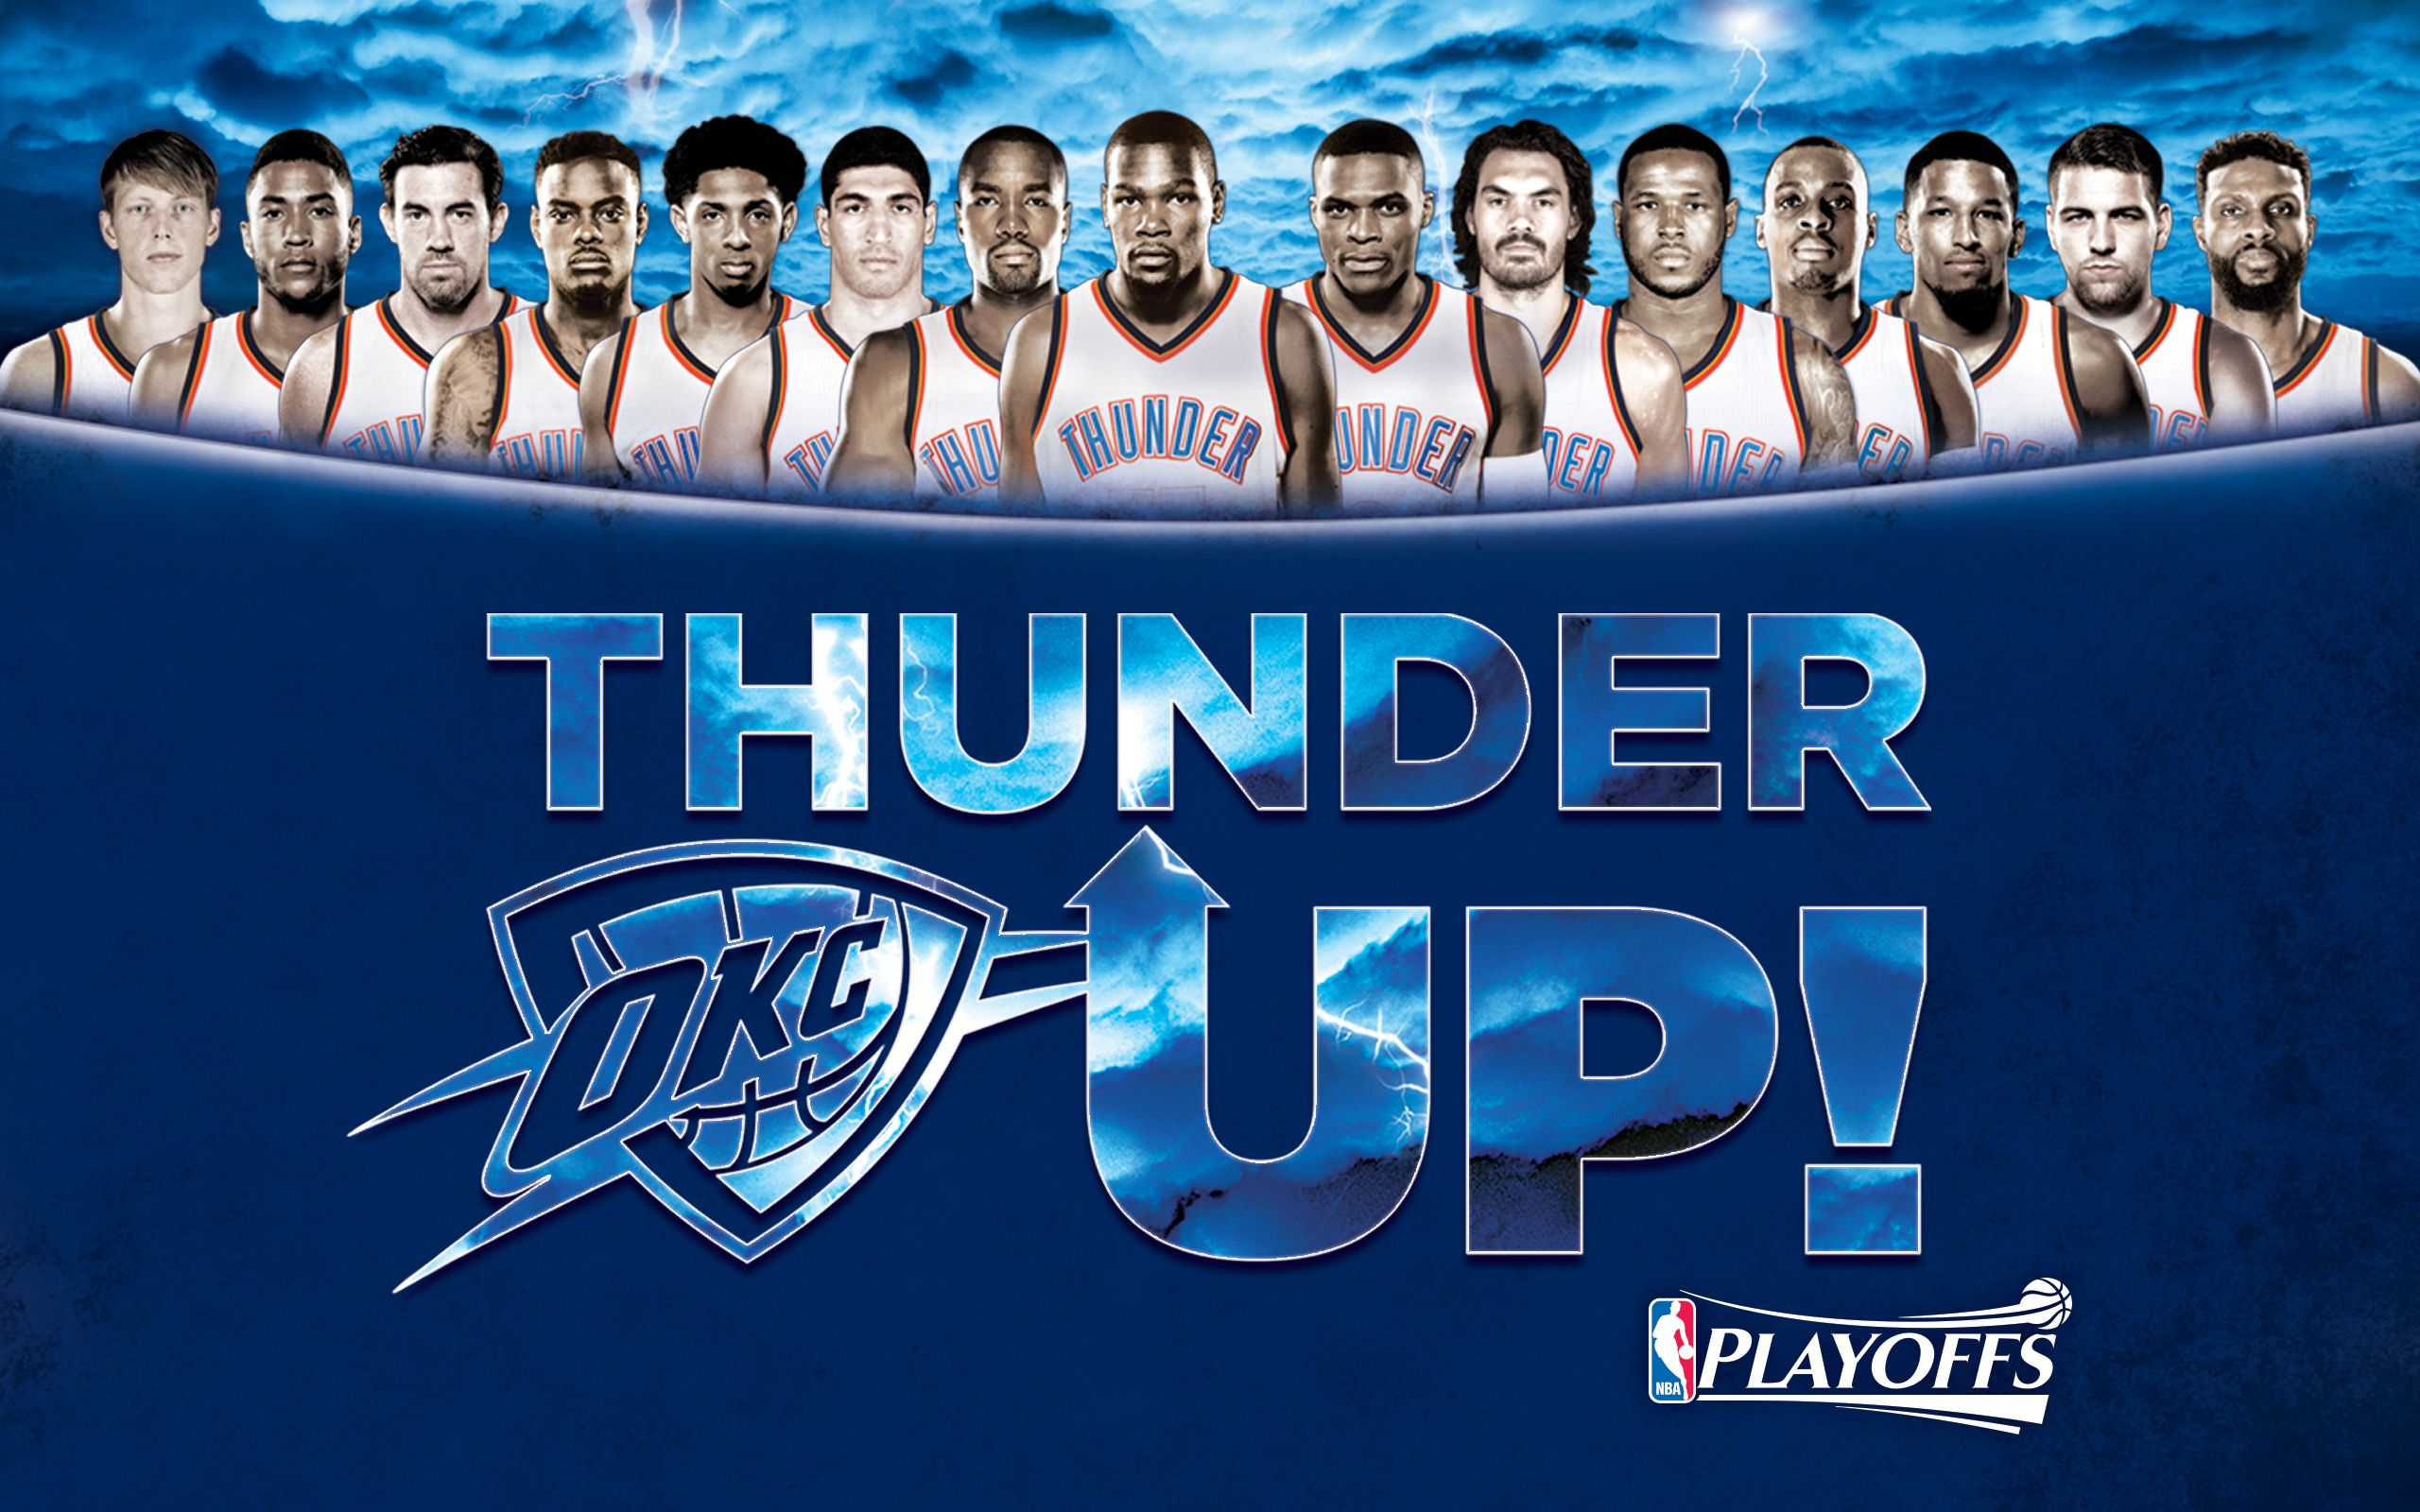 2560x1600 Oklahoma Thunder iPhone Wallpapers Top Free Oklahoma Thunder iPhone Backgrounds